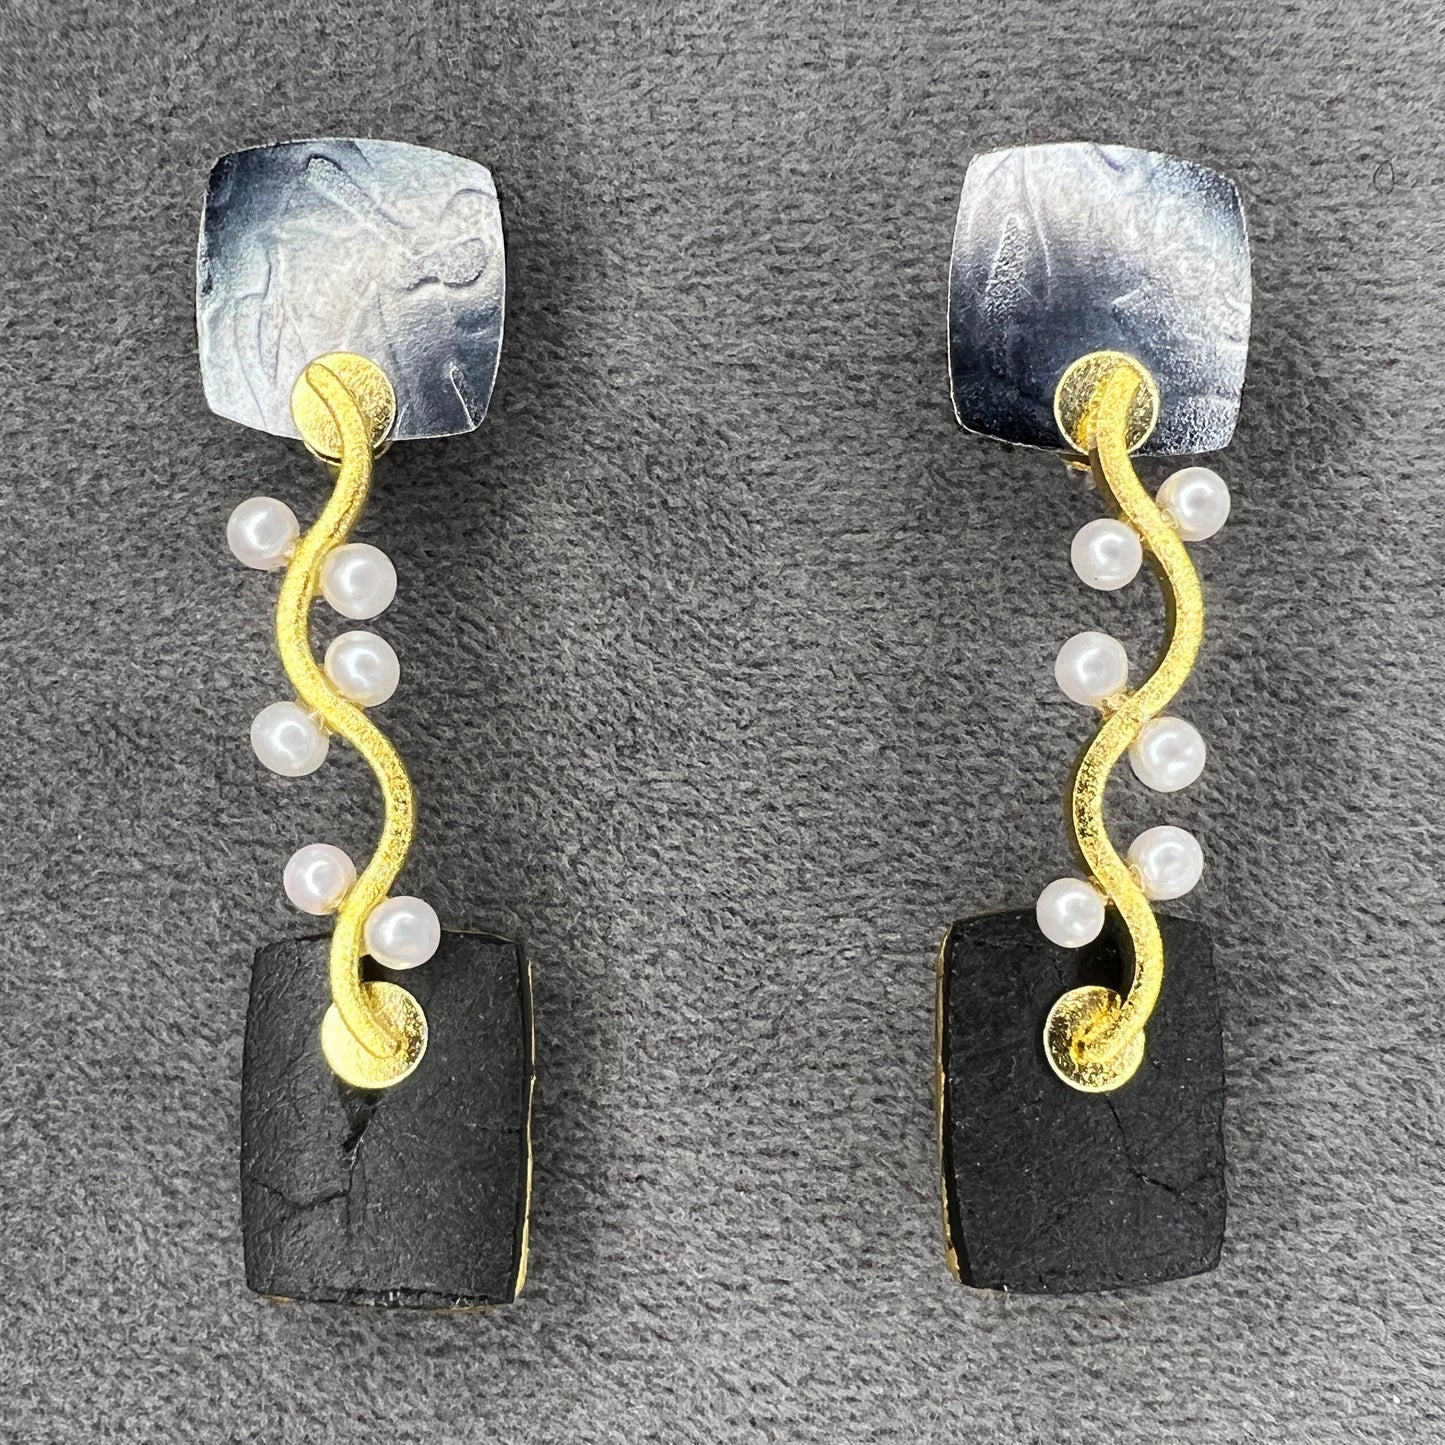 Anthracite Earrings